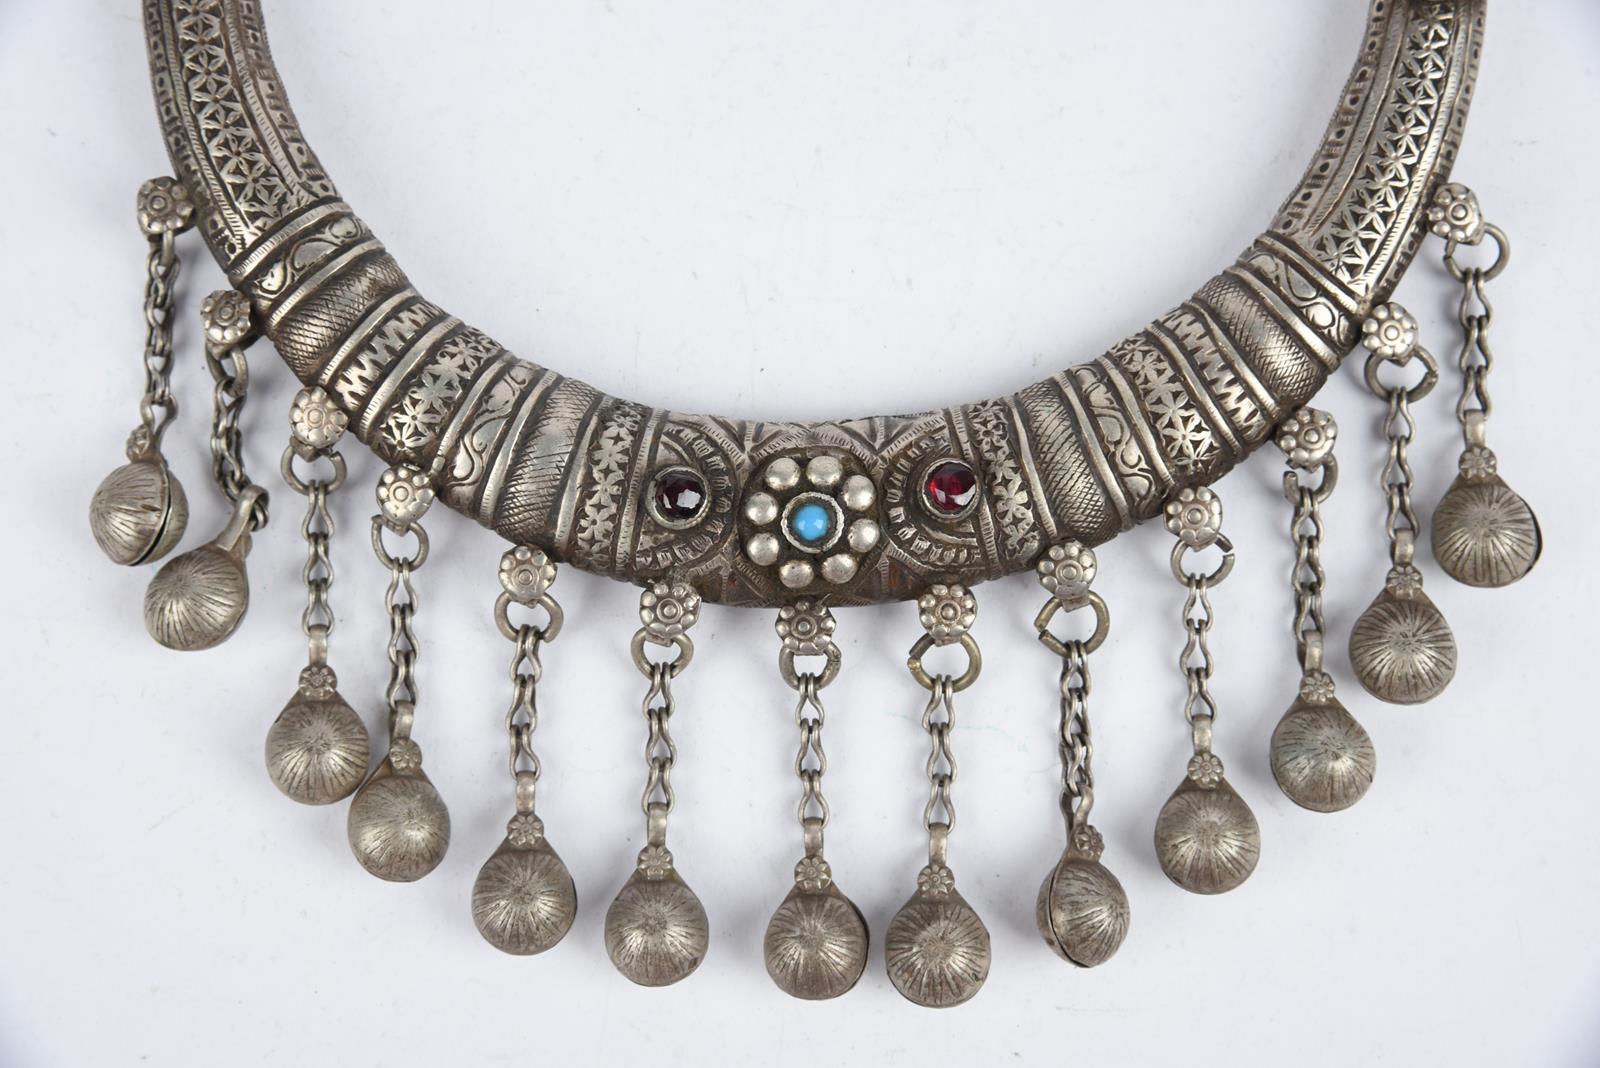 Three Nuristan torques silver coloured metal with applied blue stone and red and blue glass beads, - Image 4 of 19